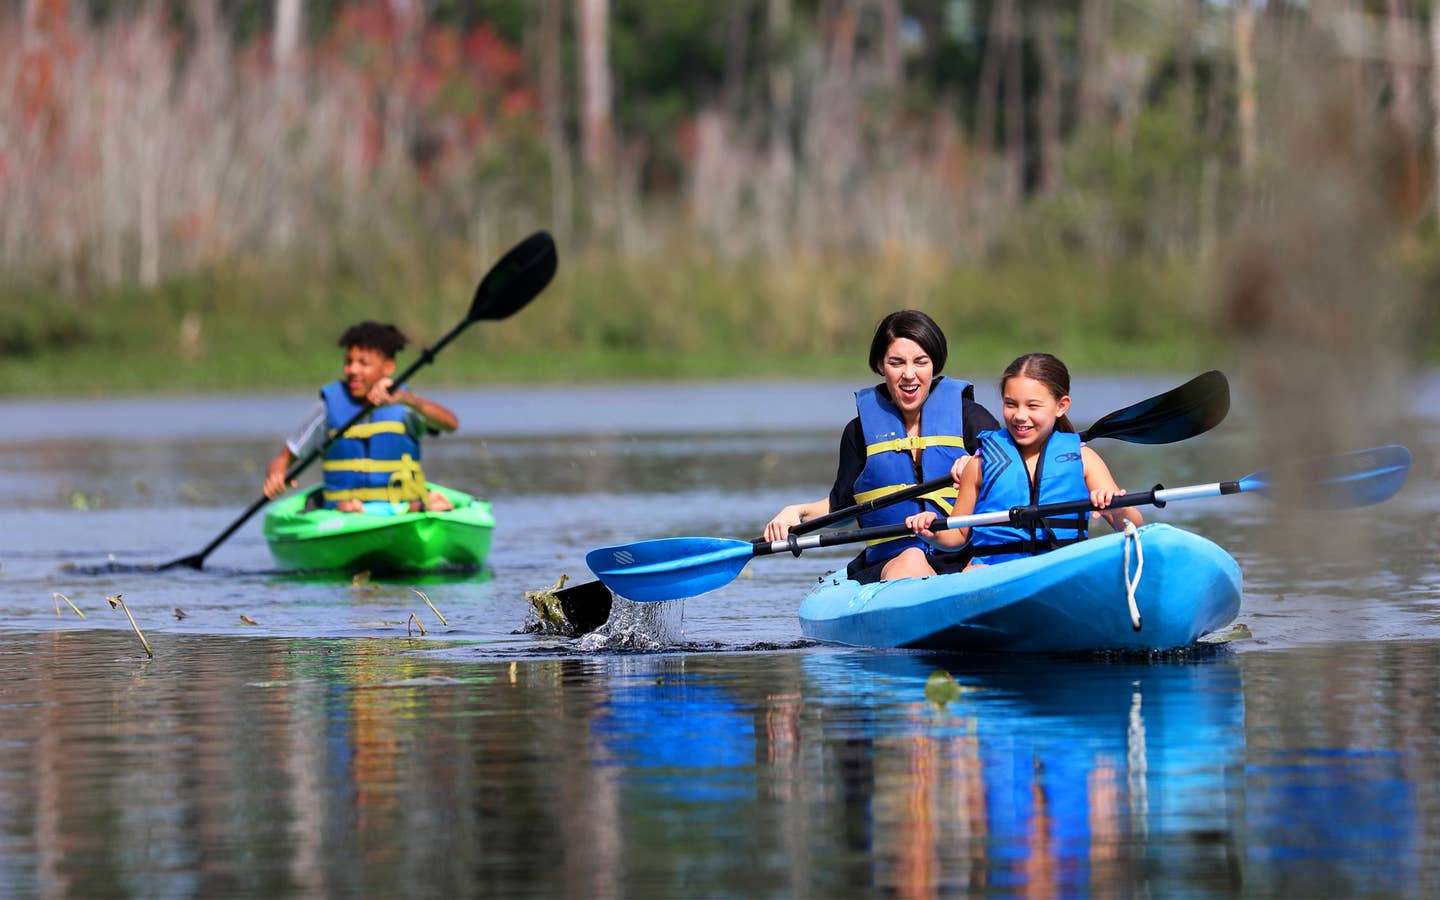 Featured Contributor, Clarissa Laskey (middle), kayaks with her daughter (right) in a blue kayak while her son (left) kayaks in his own green kayak.